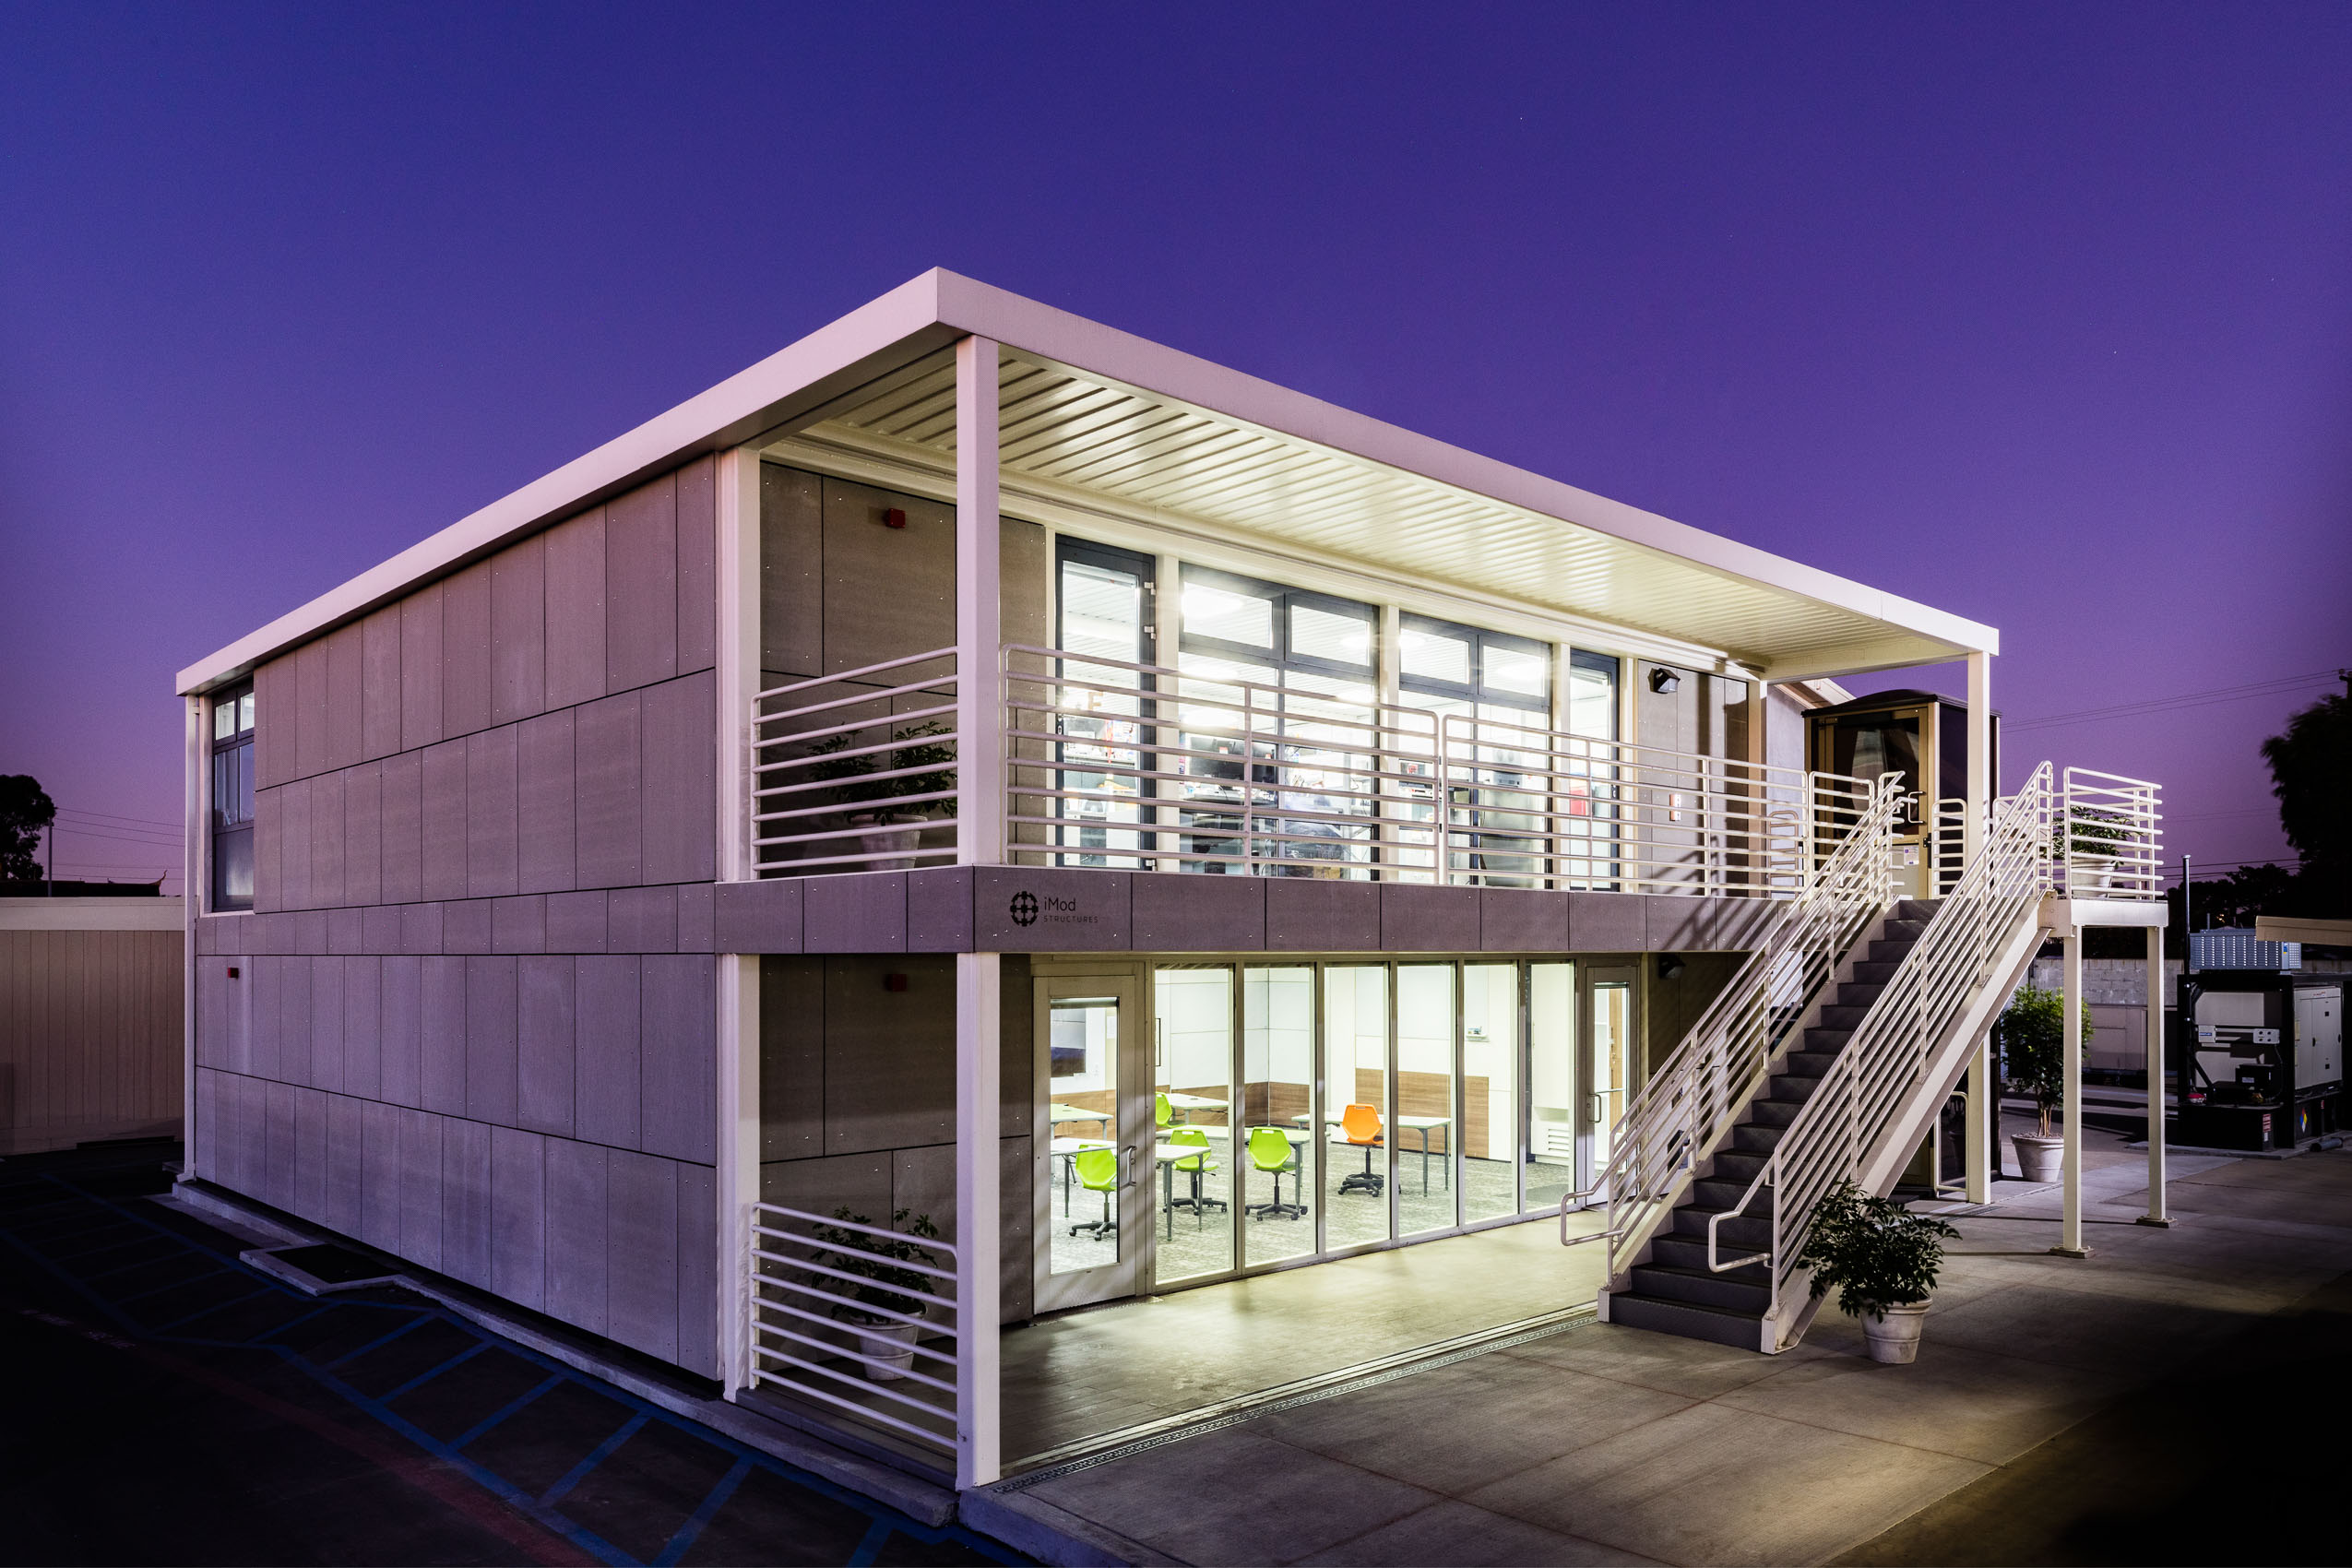  iMod Structures | Los Angeles | Editorial and Commercial Photographer Patrick Strattner